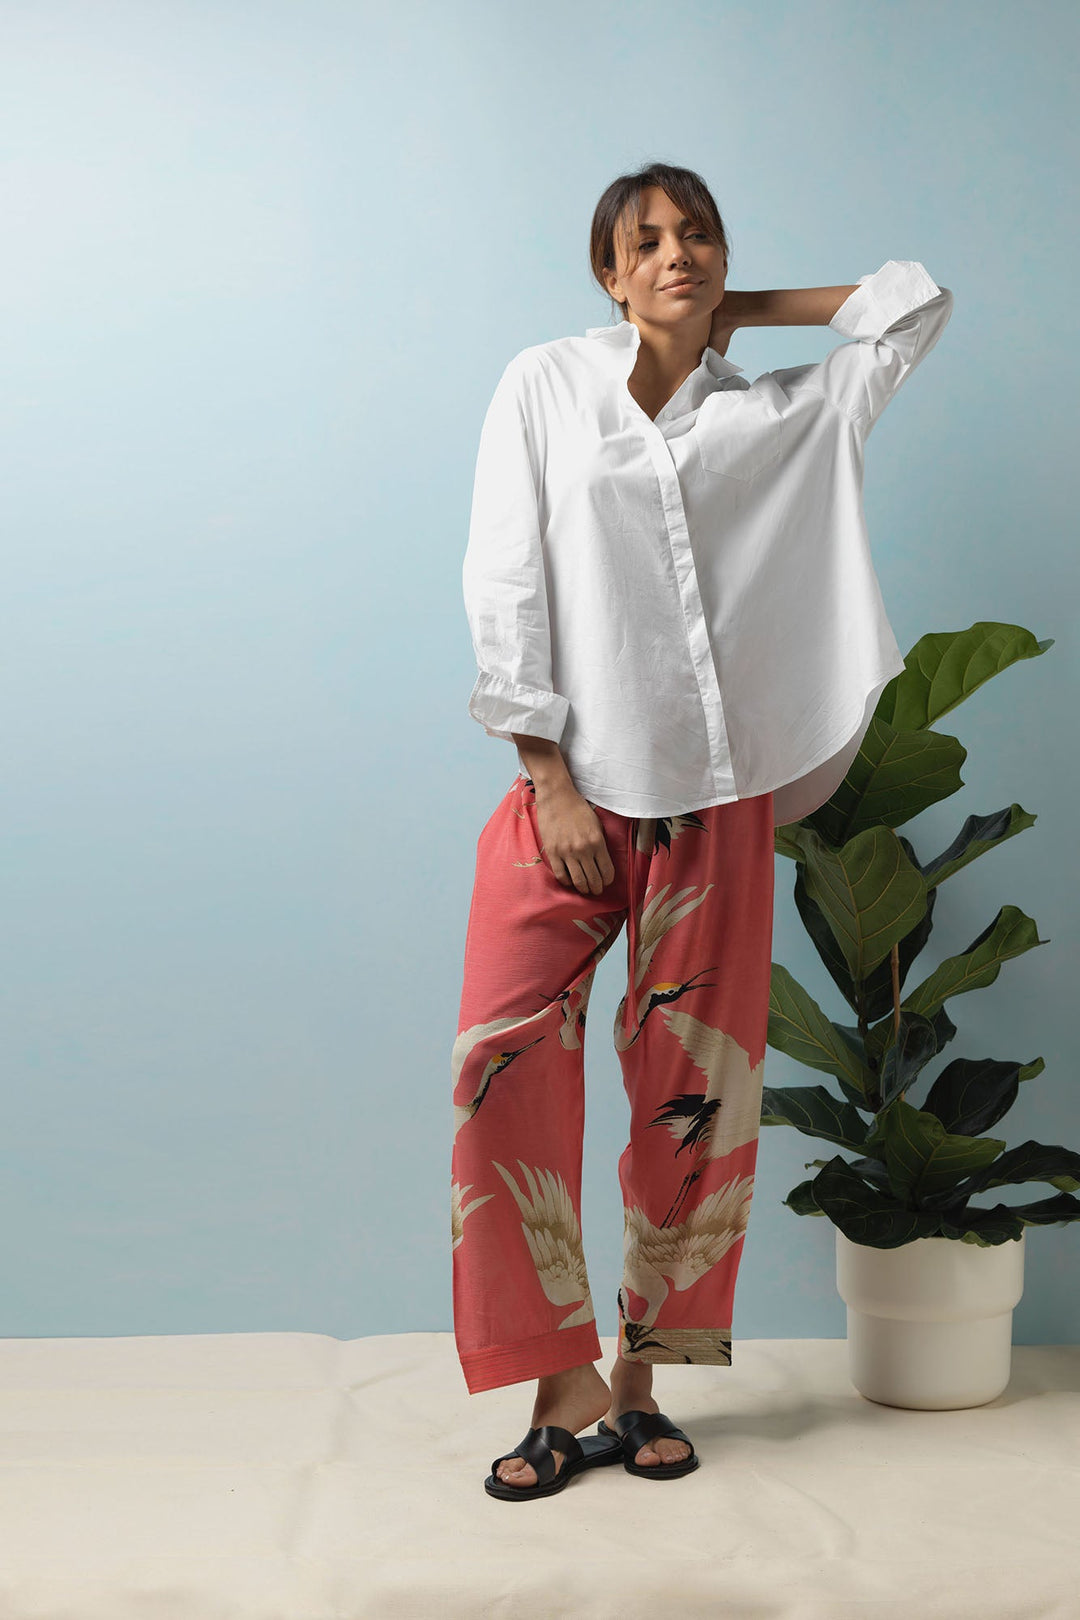 The One Hundred Stars Stork Crane Lipstick Pink Crepe Lounge Pants feature black and white cranes on a vivid pink background. Storks and cranes have been a major art deco trend.